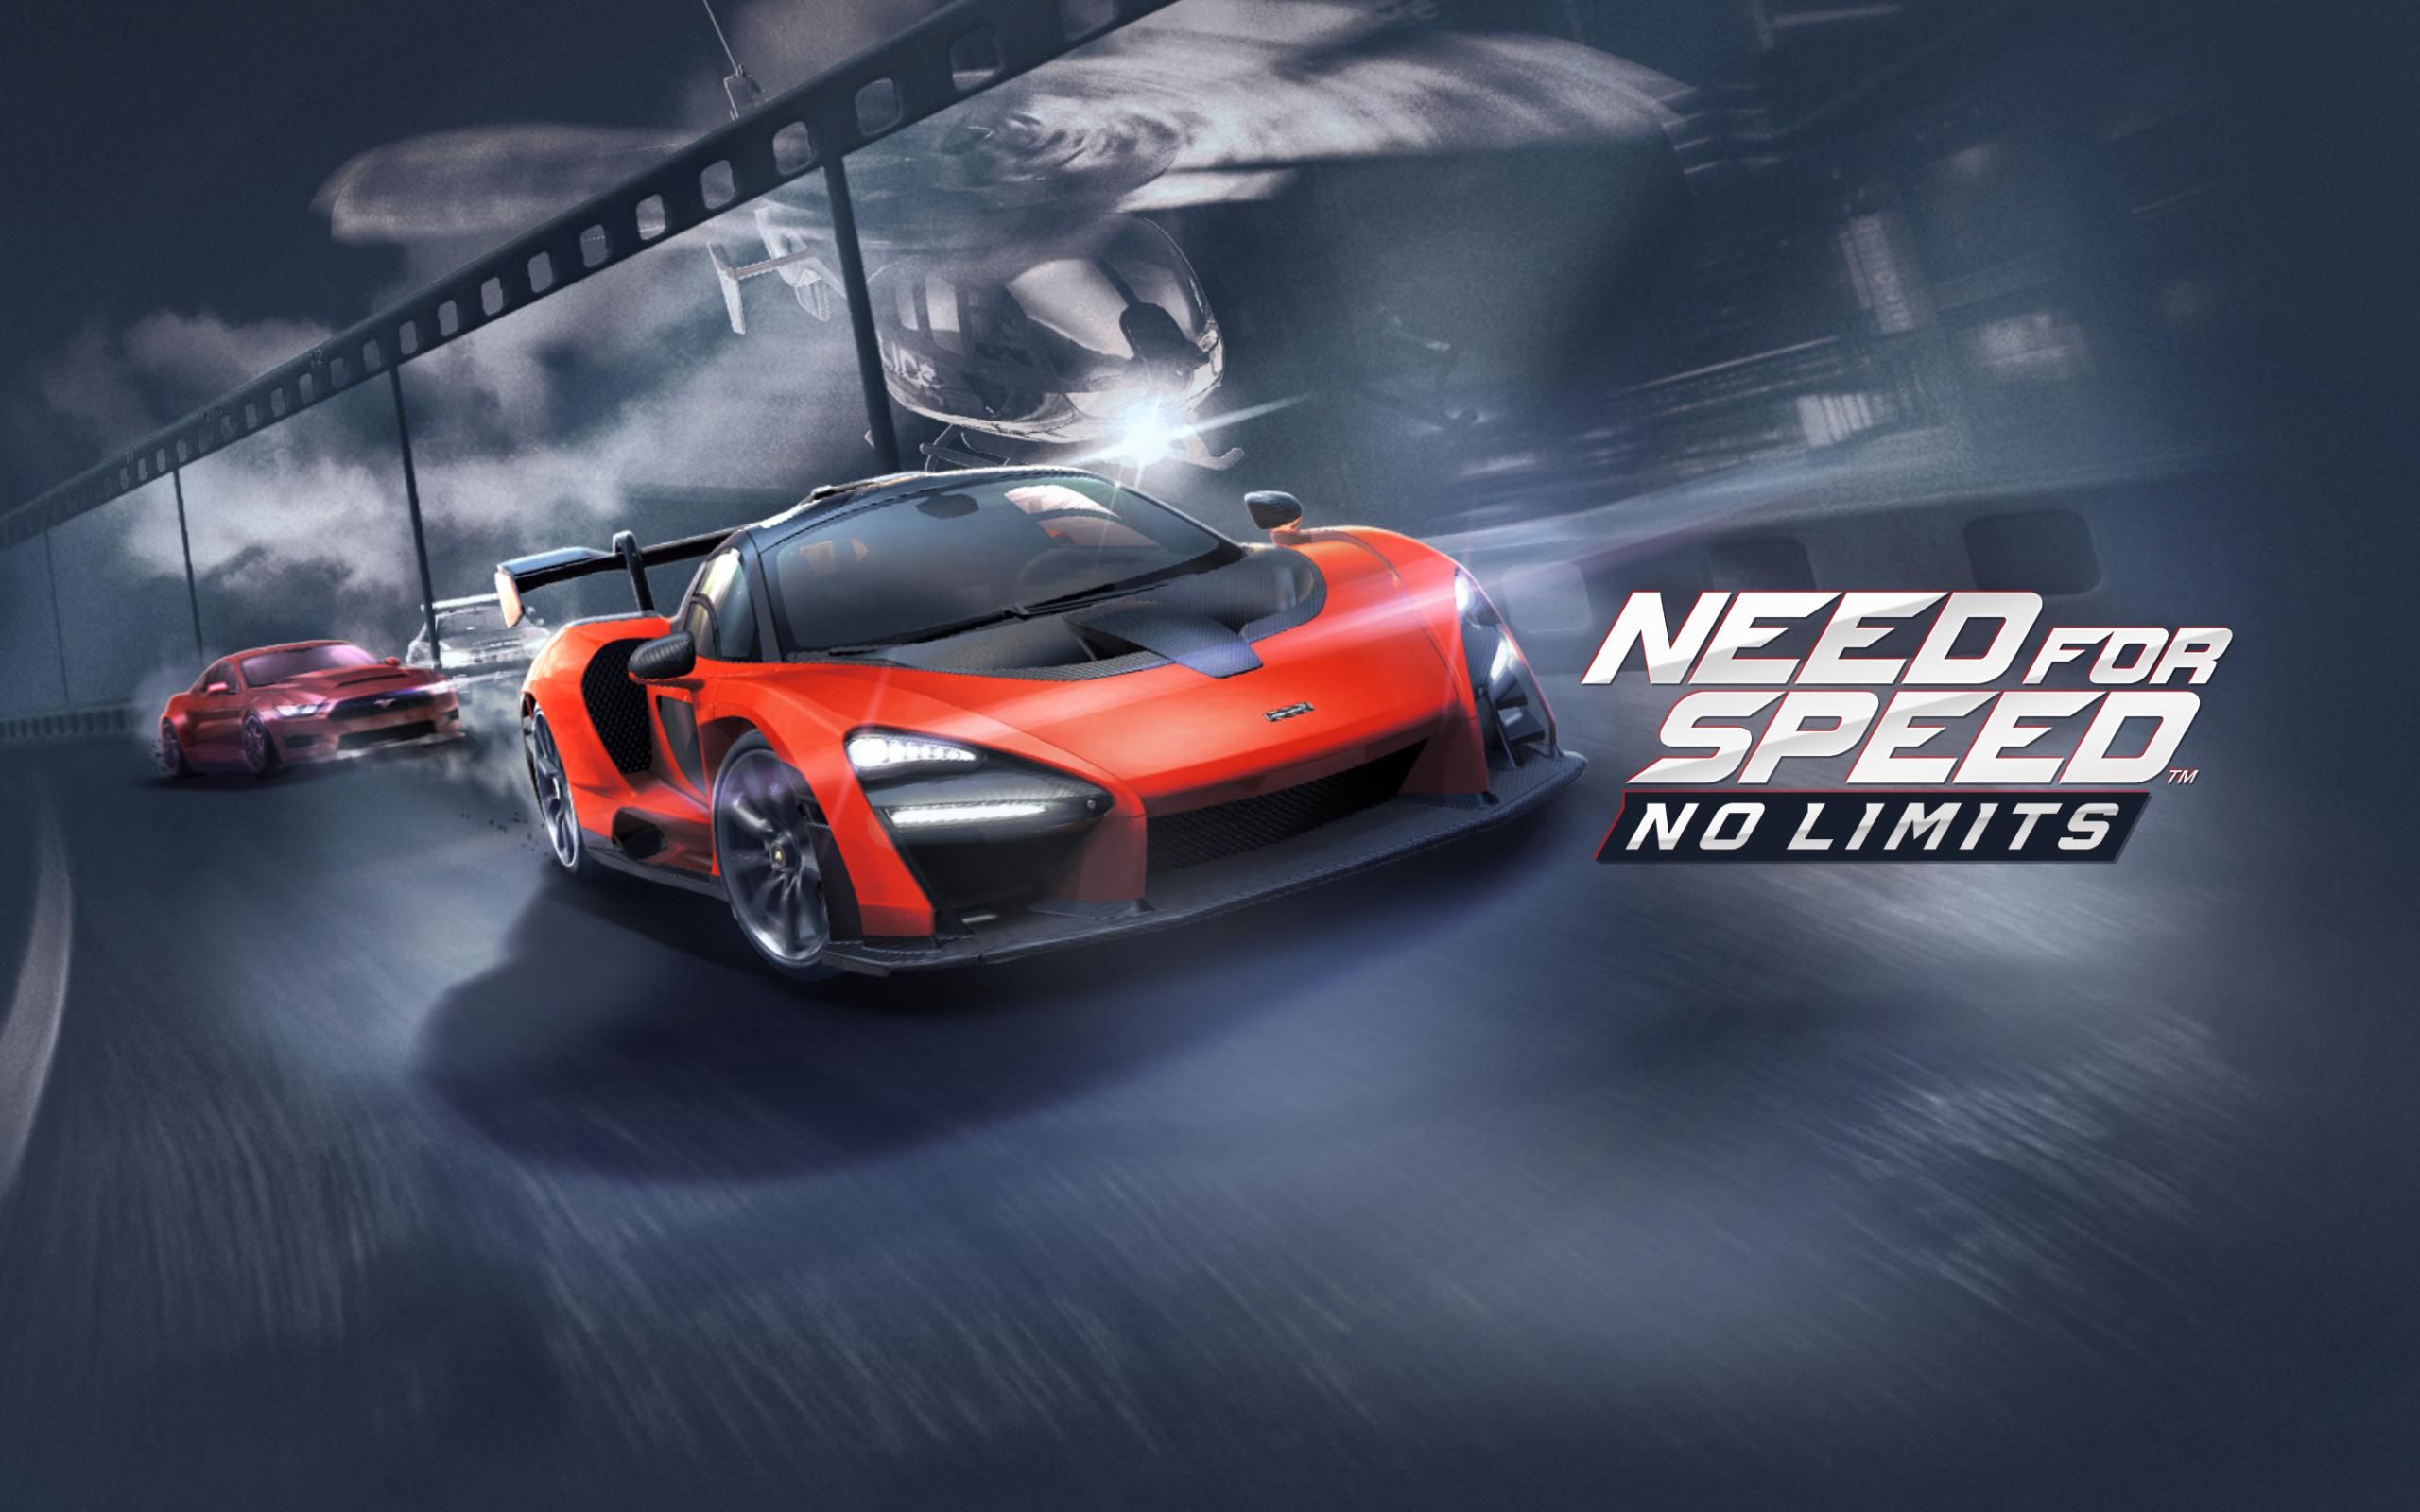 Nfs no limited mod. Need for Speed no limits. Игра NFS no limits. Гонки need for Speed no limits. Need for Speed no limits 4.7.31.